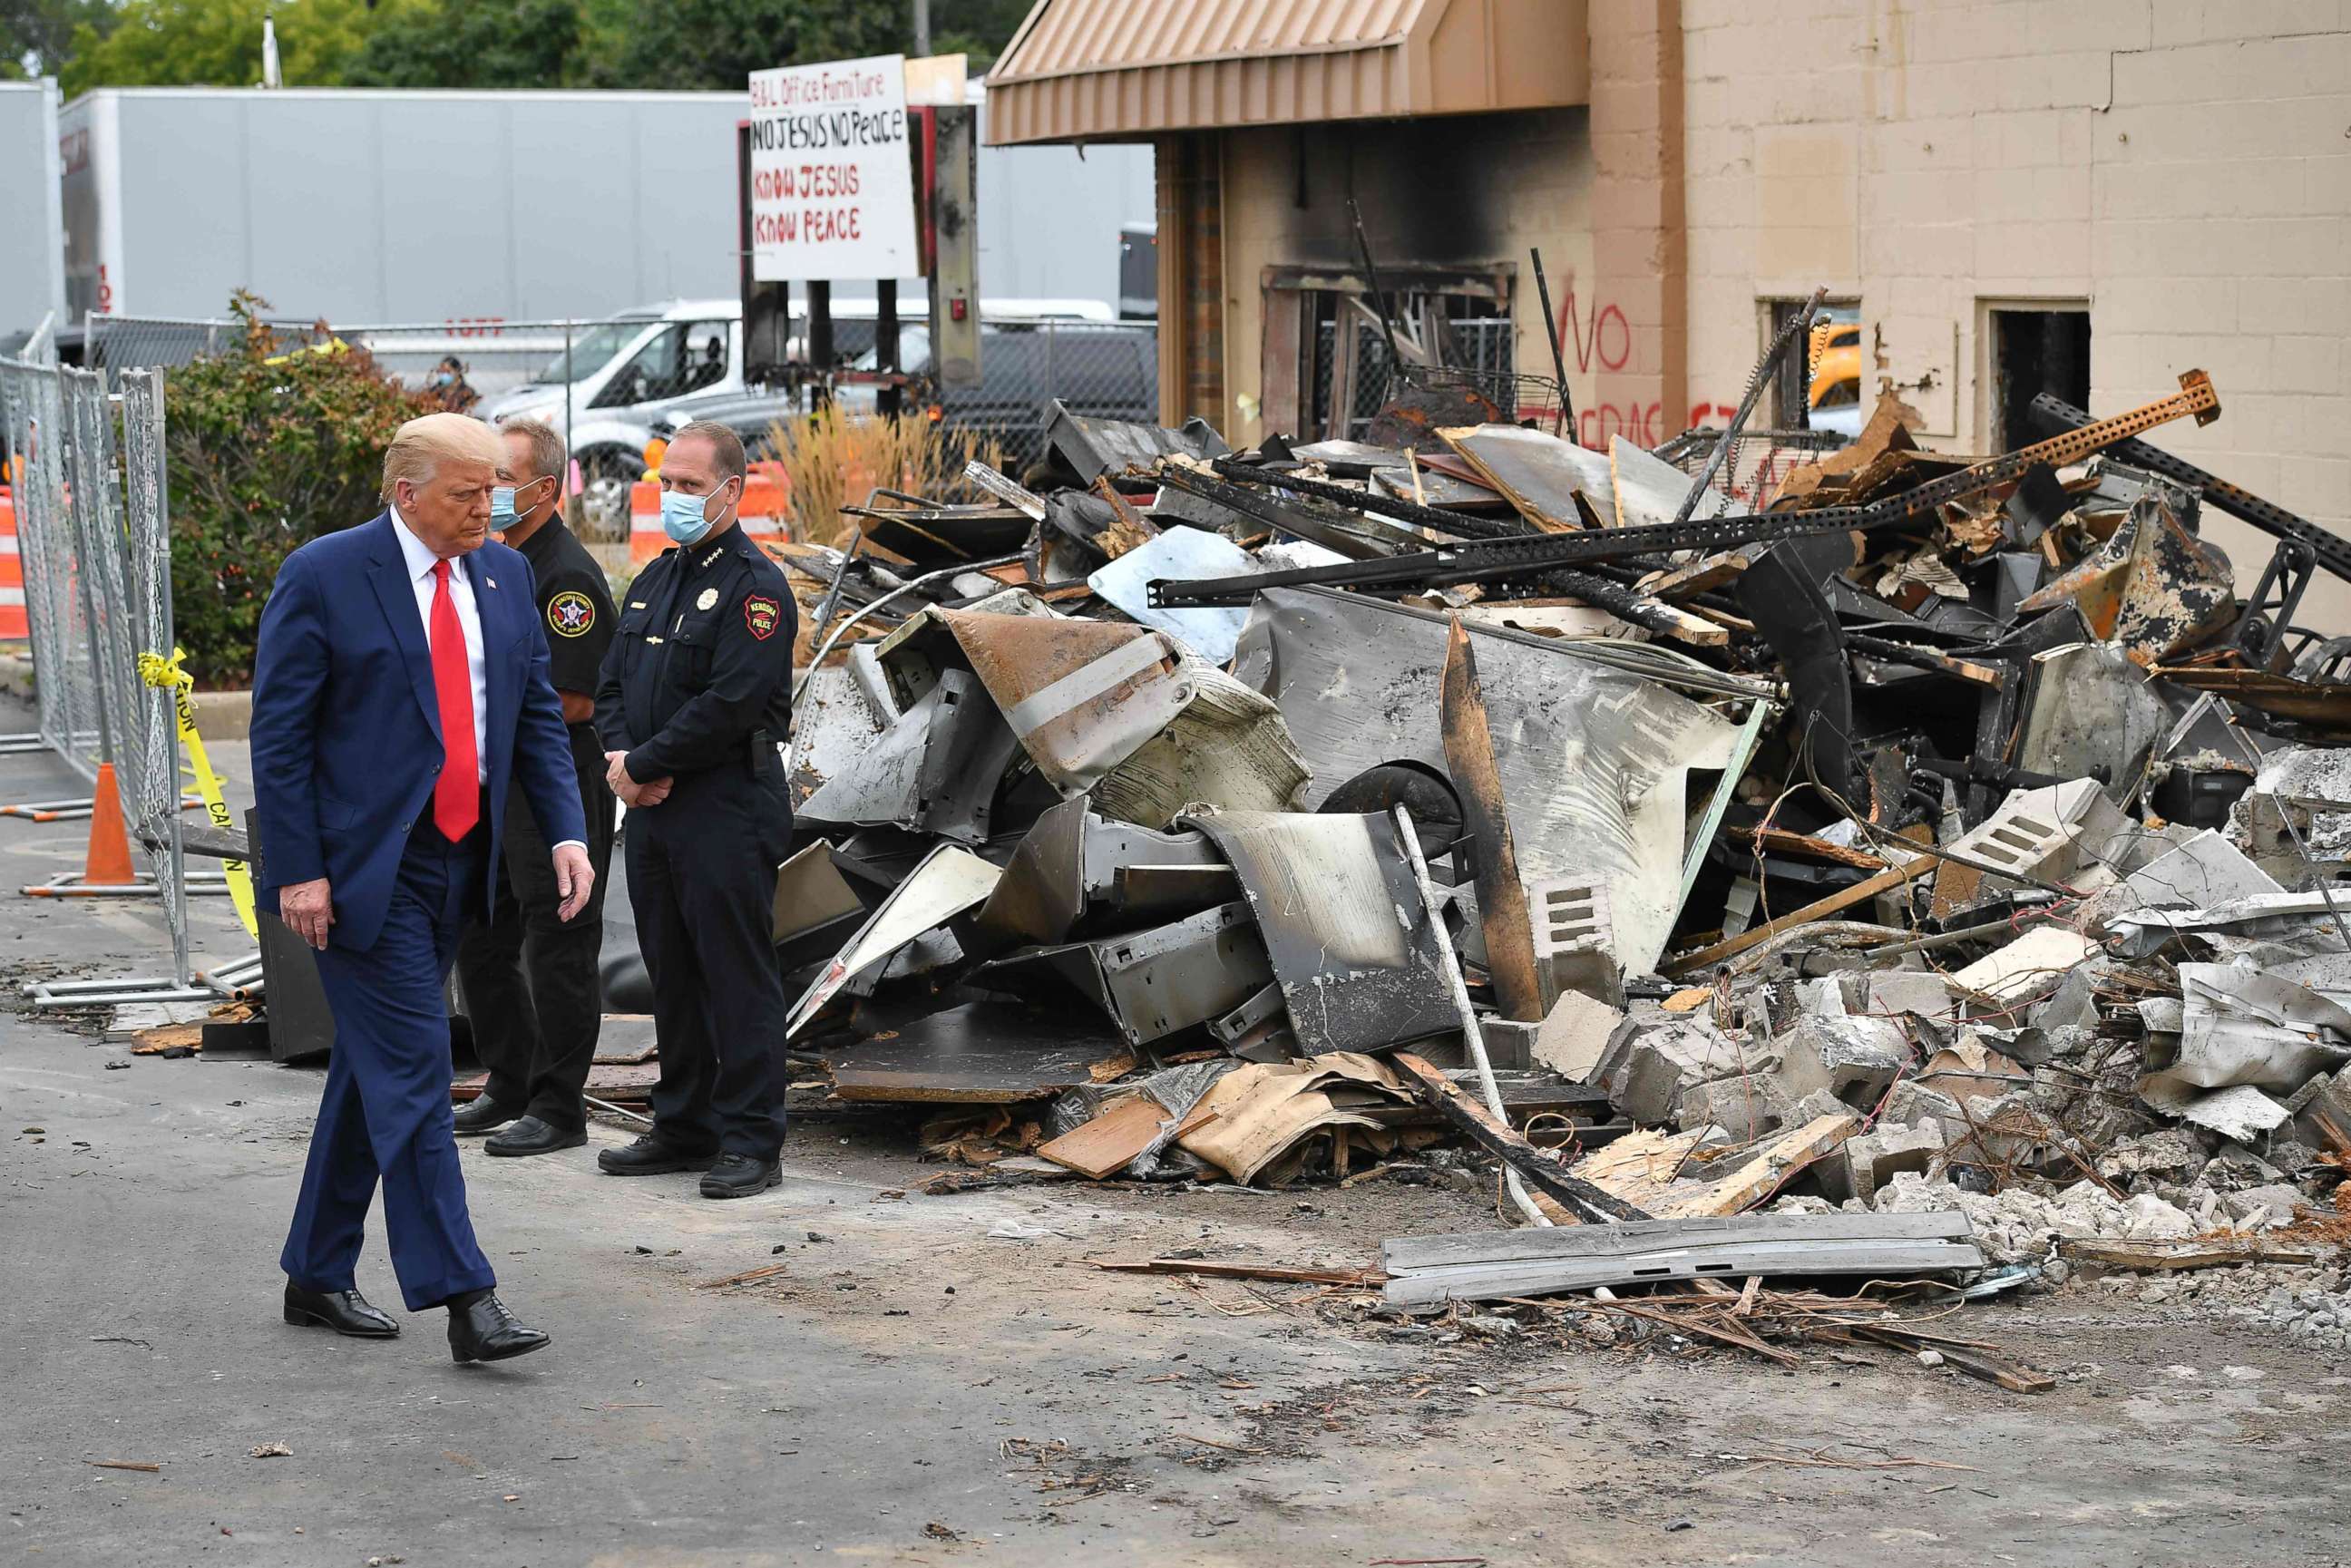 PHOTO: President Donald Trump tours an area affected by civil unrest in Kenosha, Wisconsin, Sept. 1, 2020.